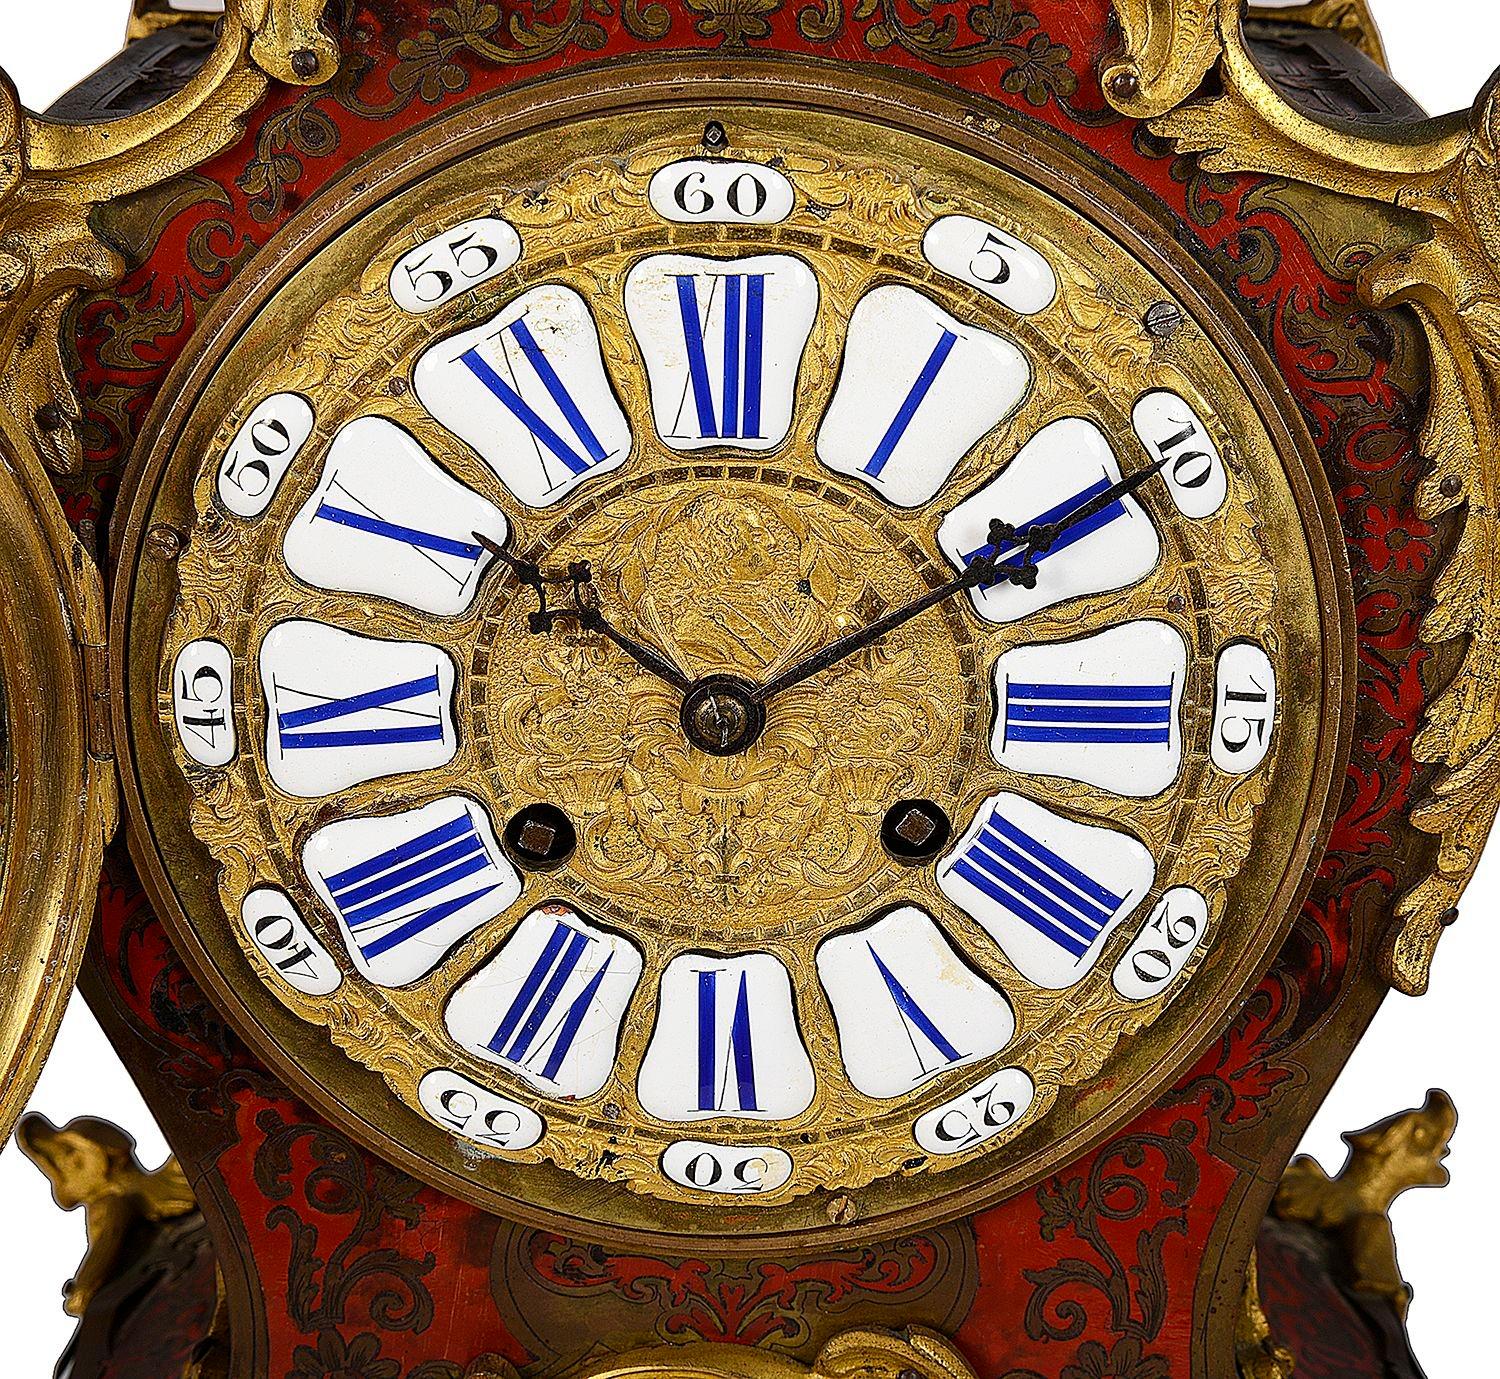 french boulle clock